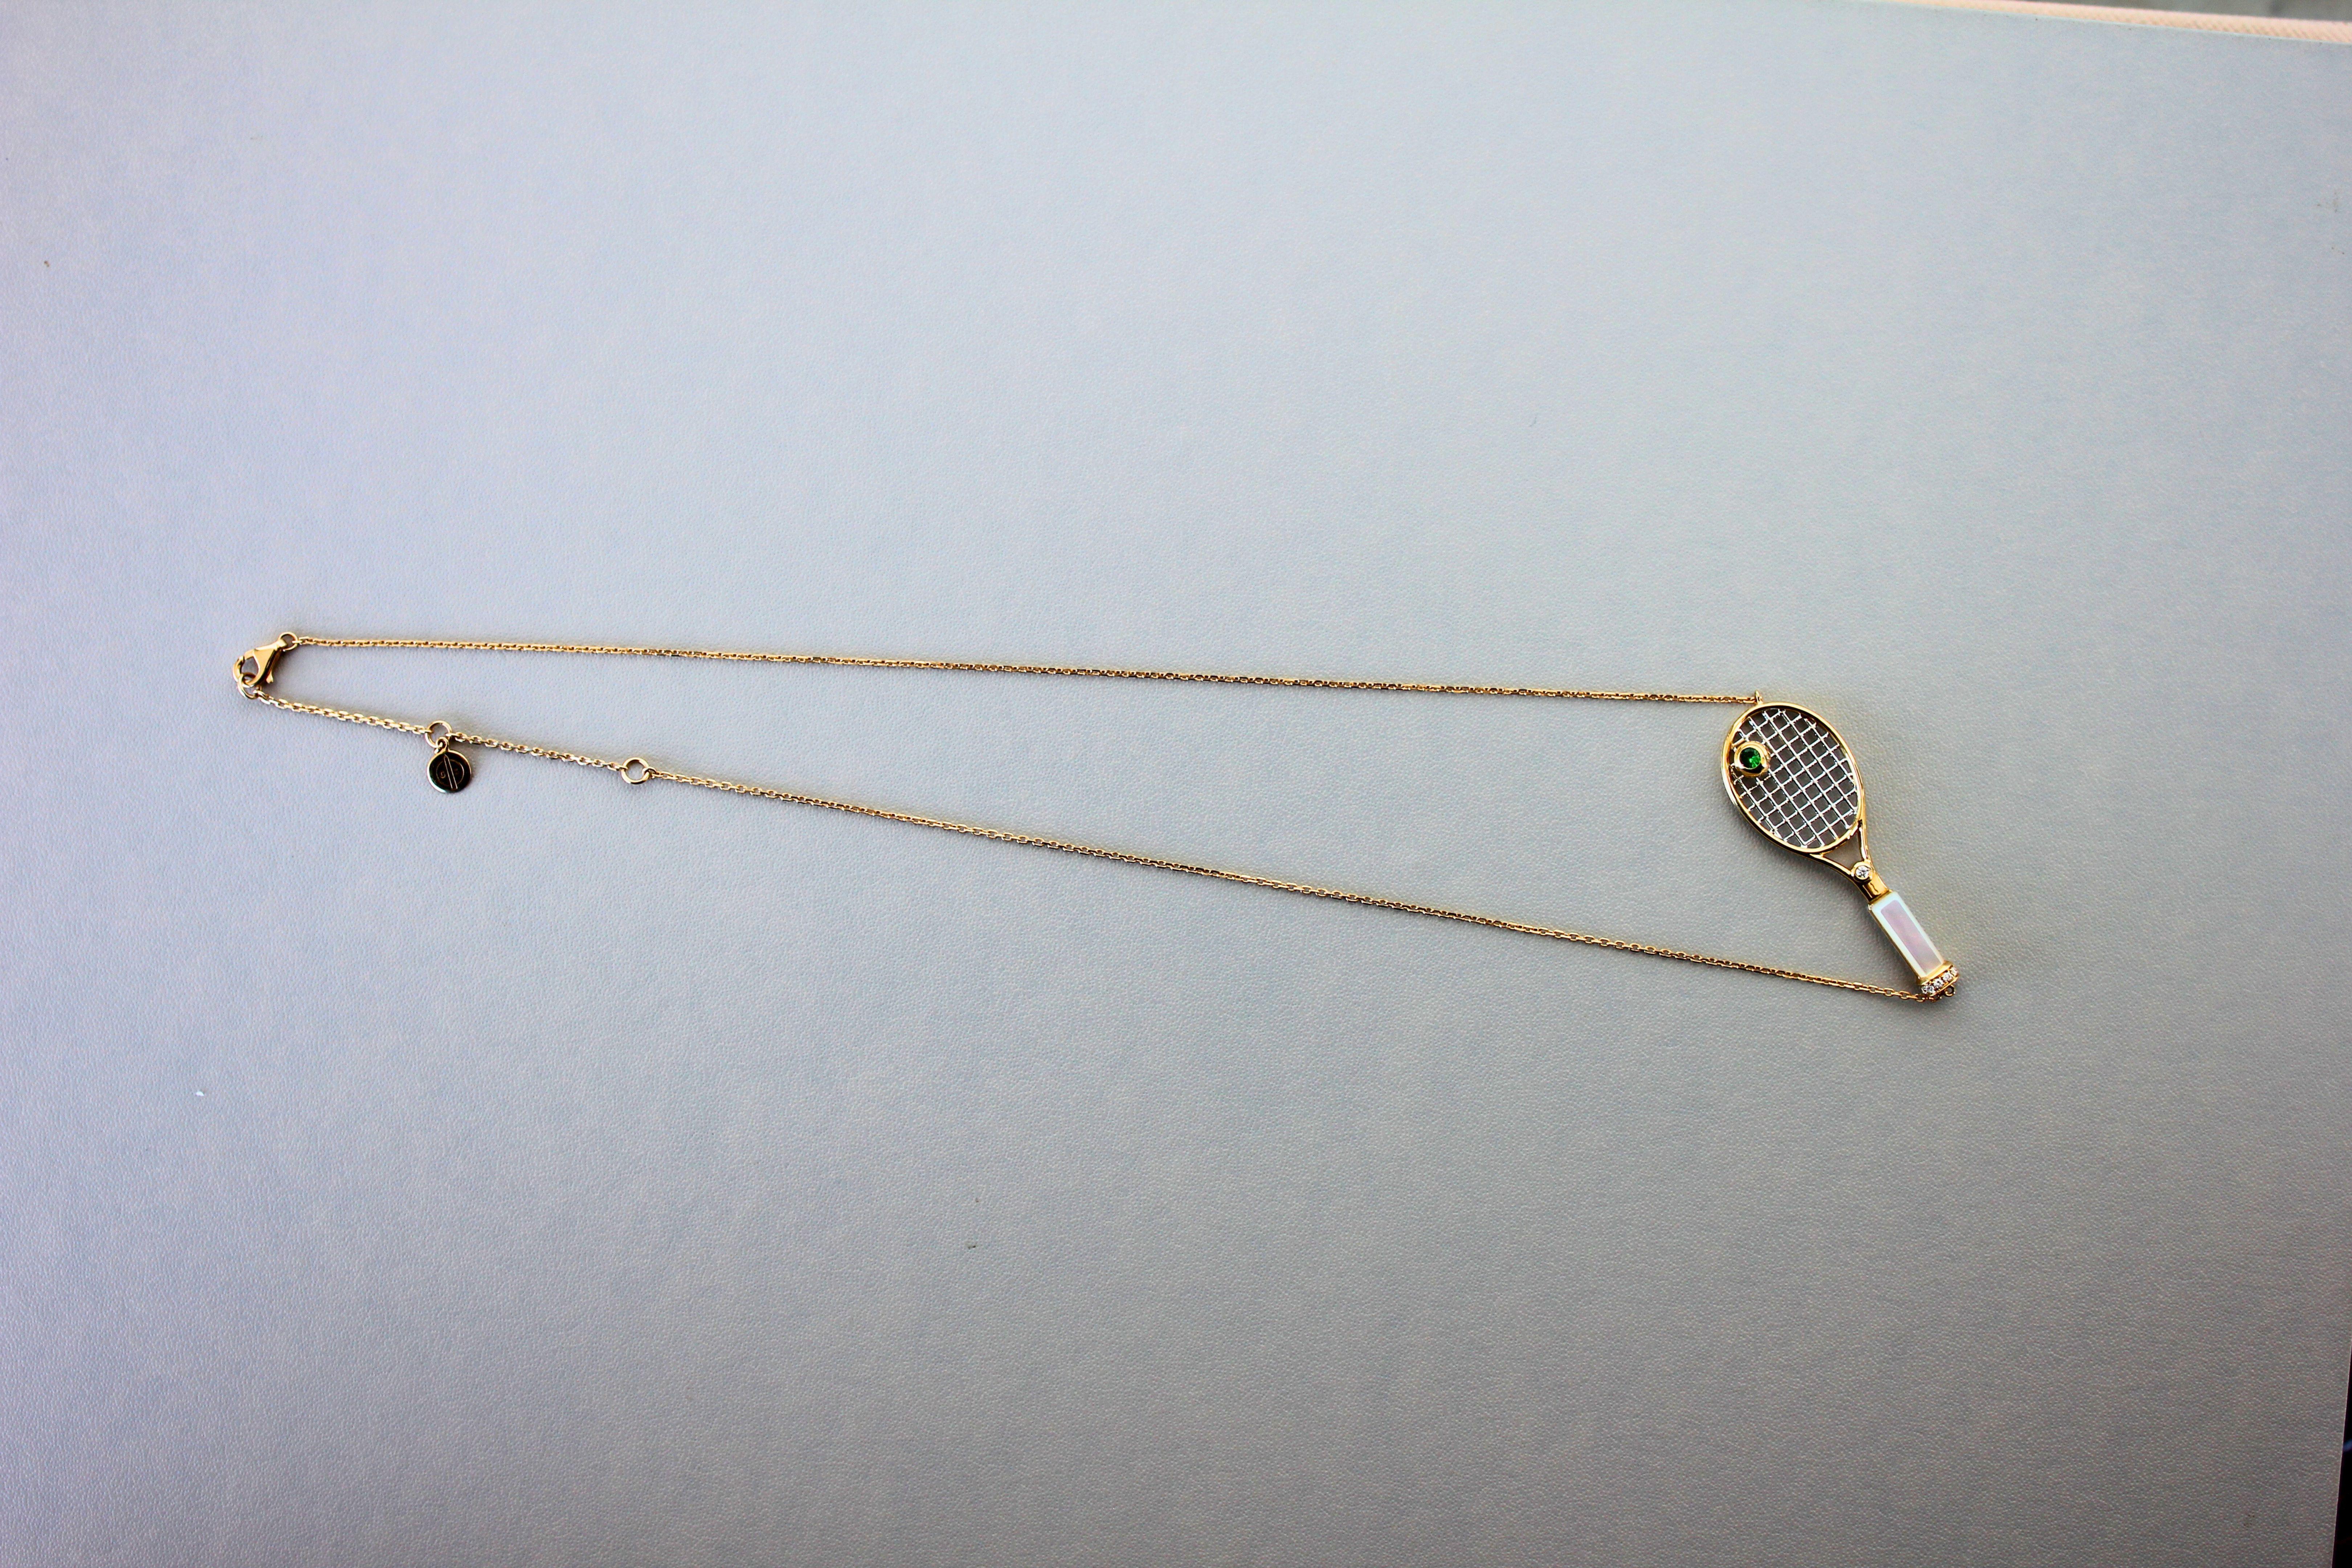 necklace with tennis racket